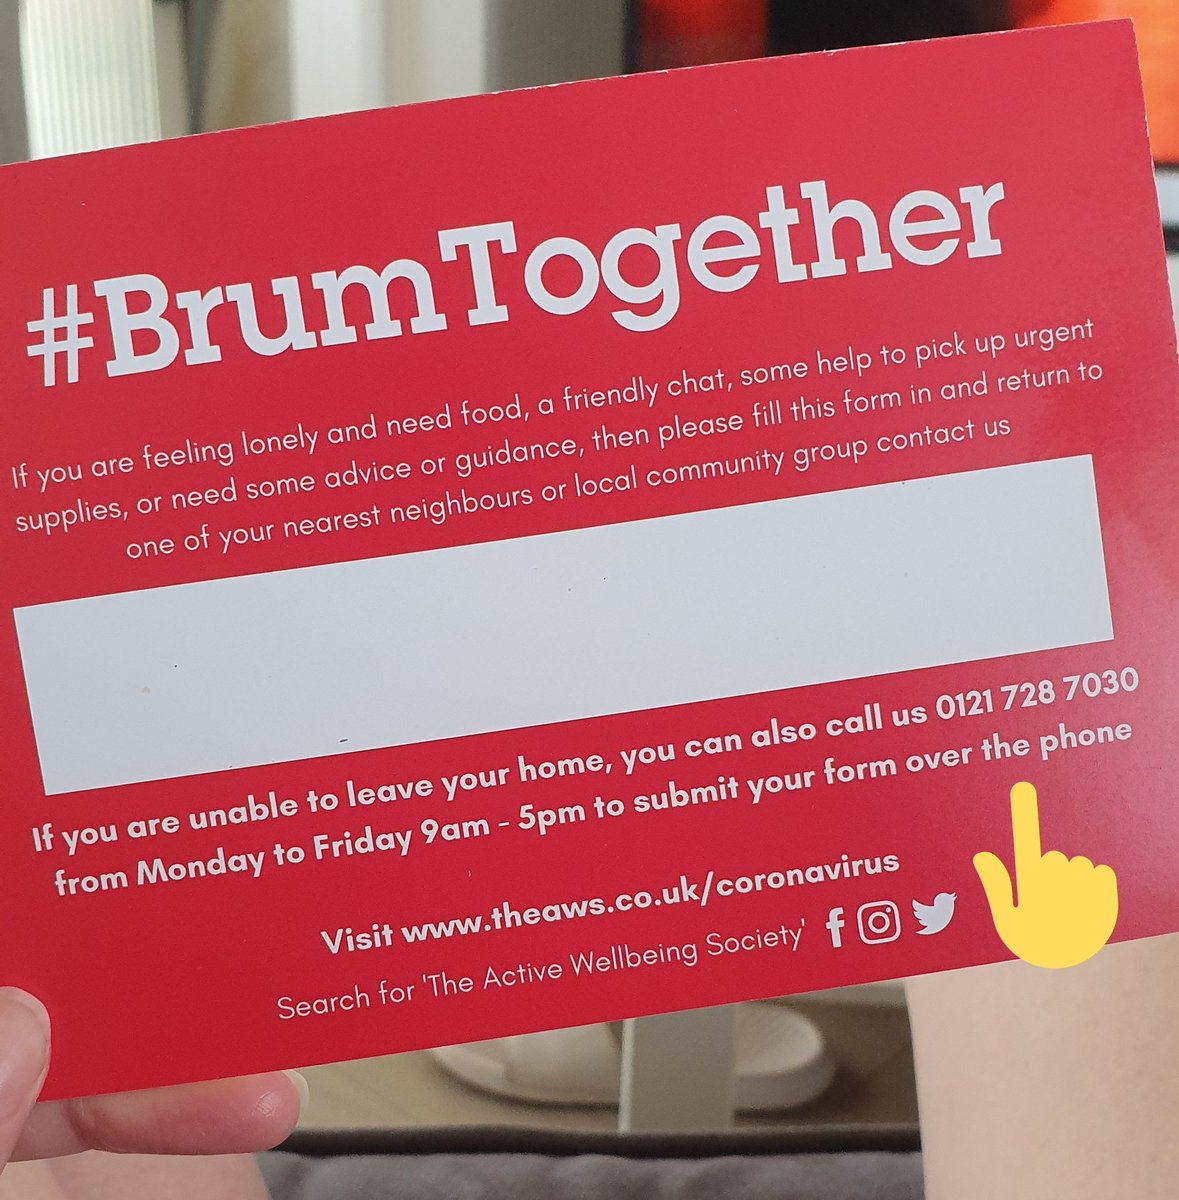 Been posting these through letterboxes today, if you know of anyone that might benefit pass this on or call for them 😊 #BrumTogether